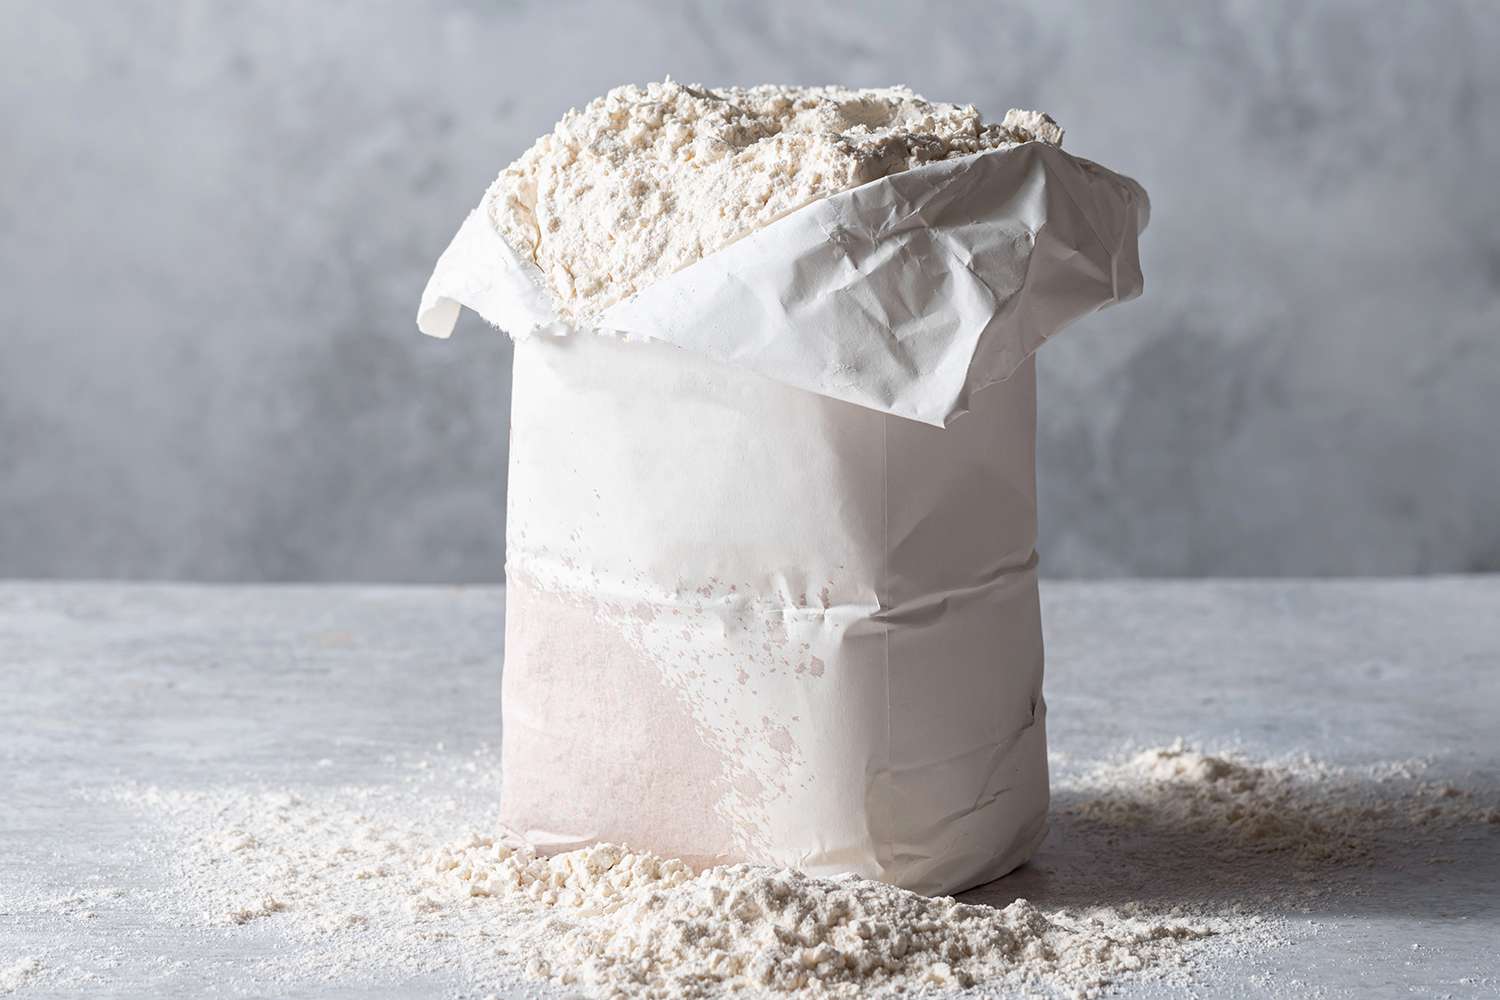 How To Store Large Amounts Of Flour